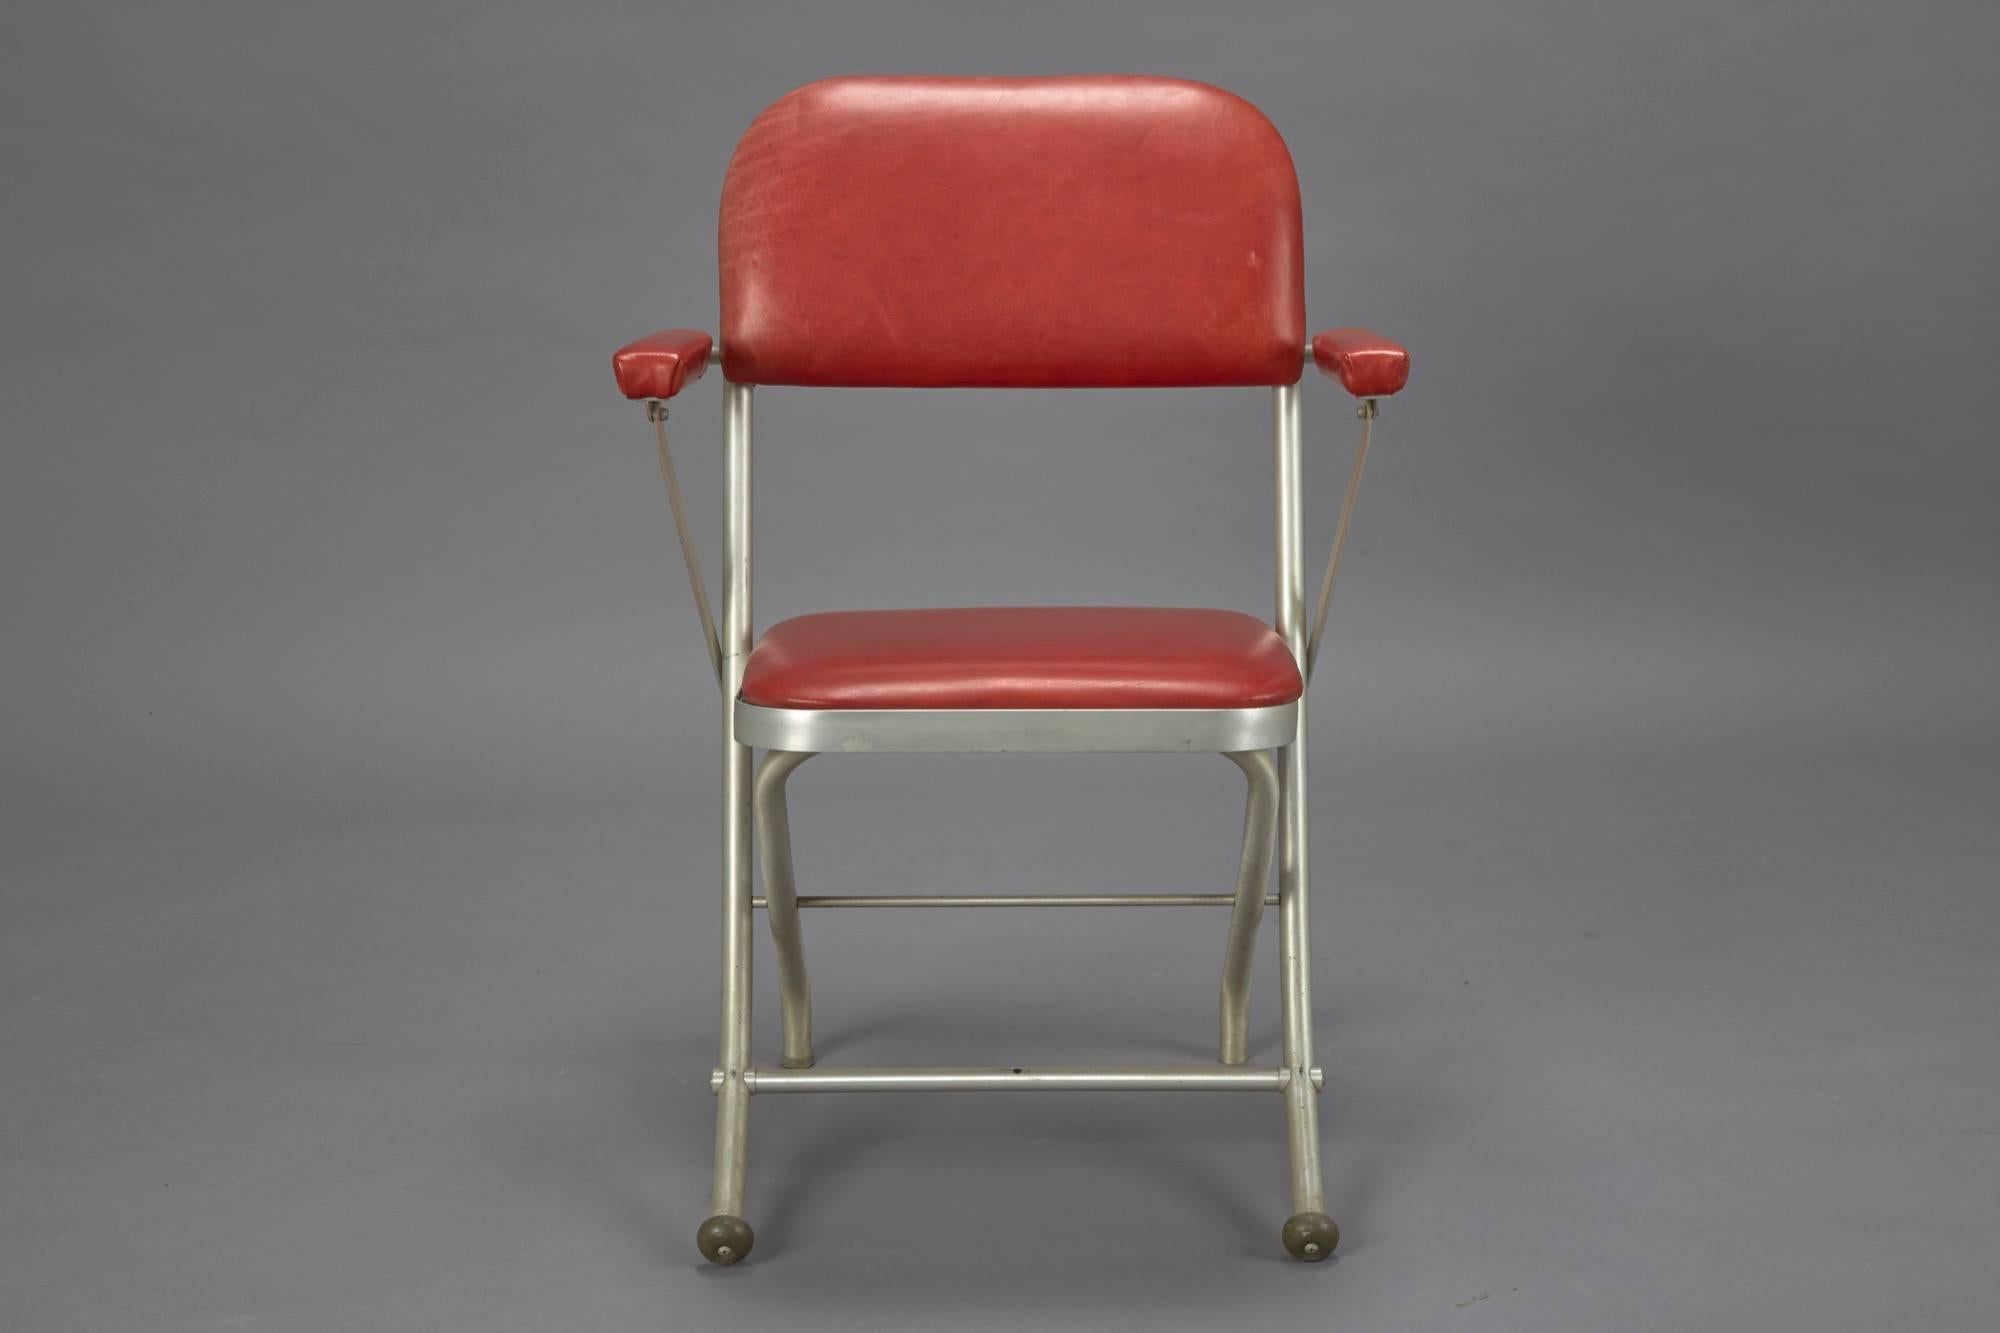 These Art Deco style Mid-Century Modern folding chairs were designed by Warren McArthur and manufactured by Mayfair Industries. They are constructed of tubular aluminium and feature red leather upholstery.